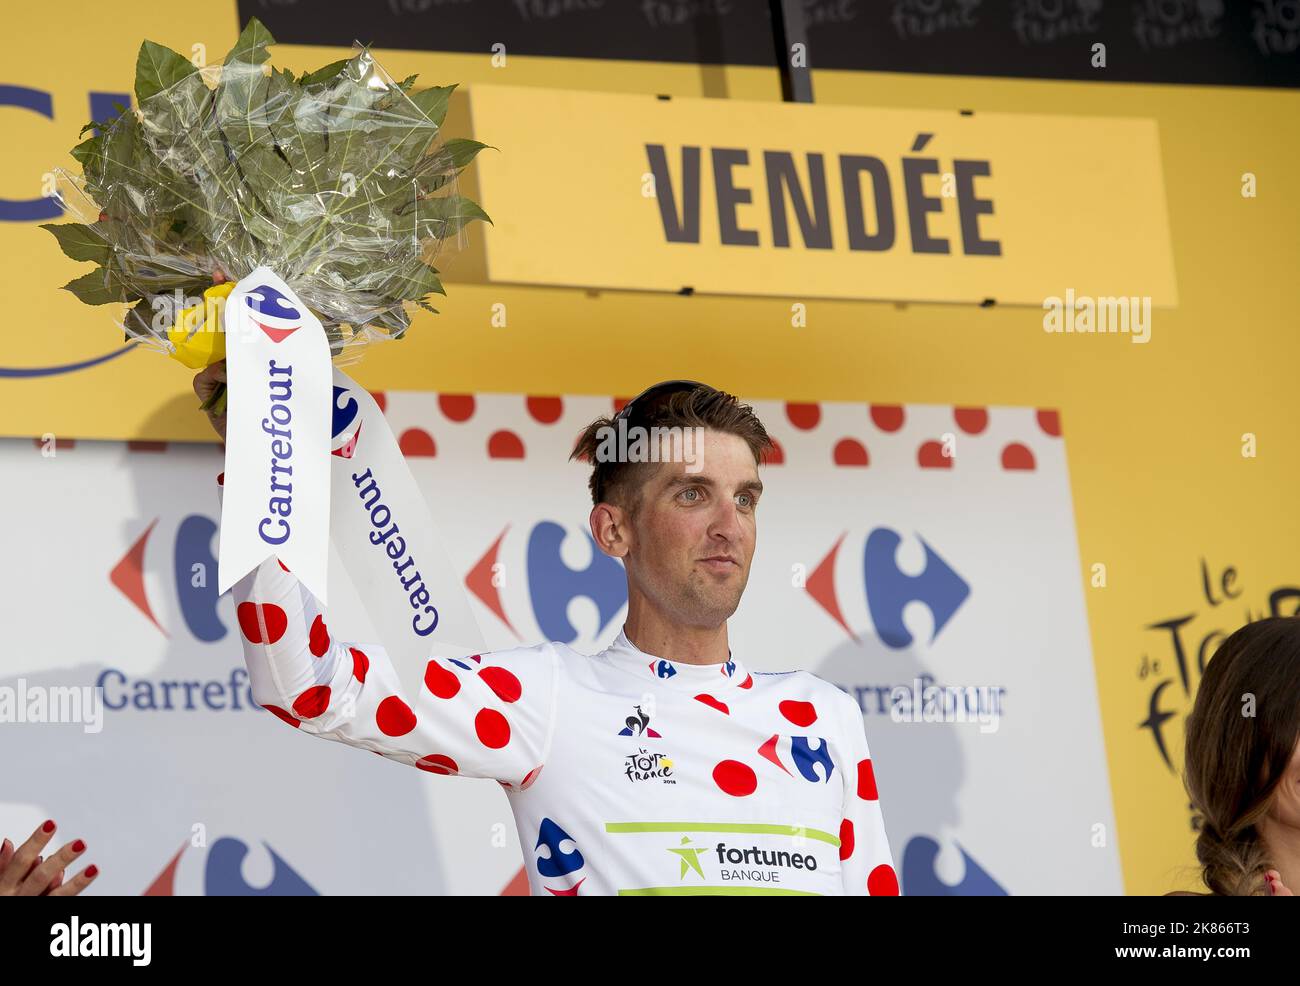 Finish line Kevin Ledanois (Team Fortuneo-Samsic) takes the mountain leader's jersey on the first day of racing during Tour de France 2018 Stage 1 - Noirmoutier en L'Ille to Fontenay Le Comte.  Stock Photo